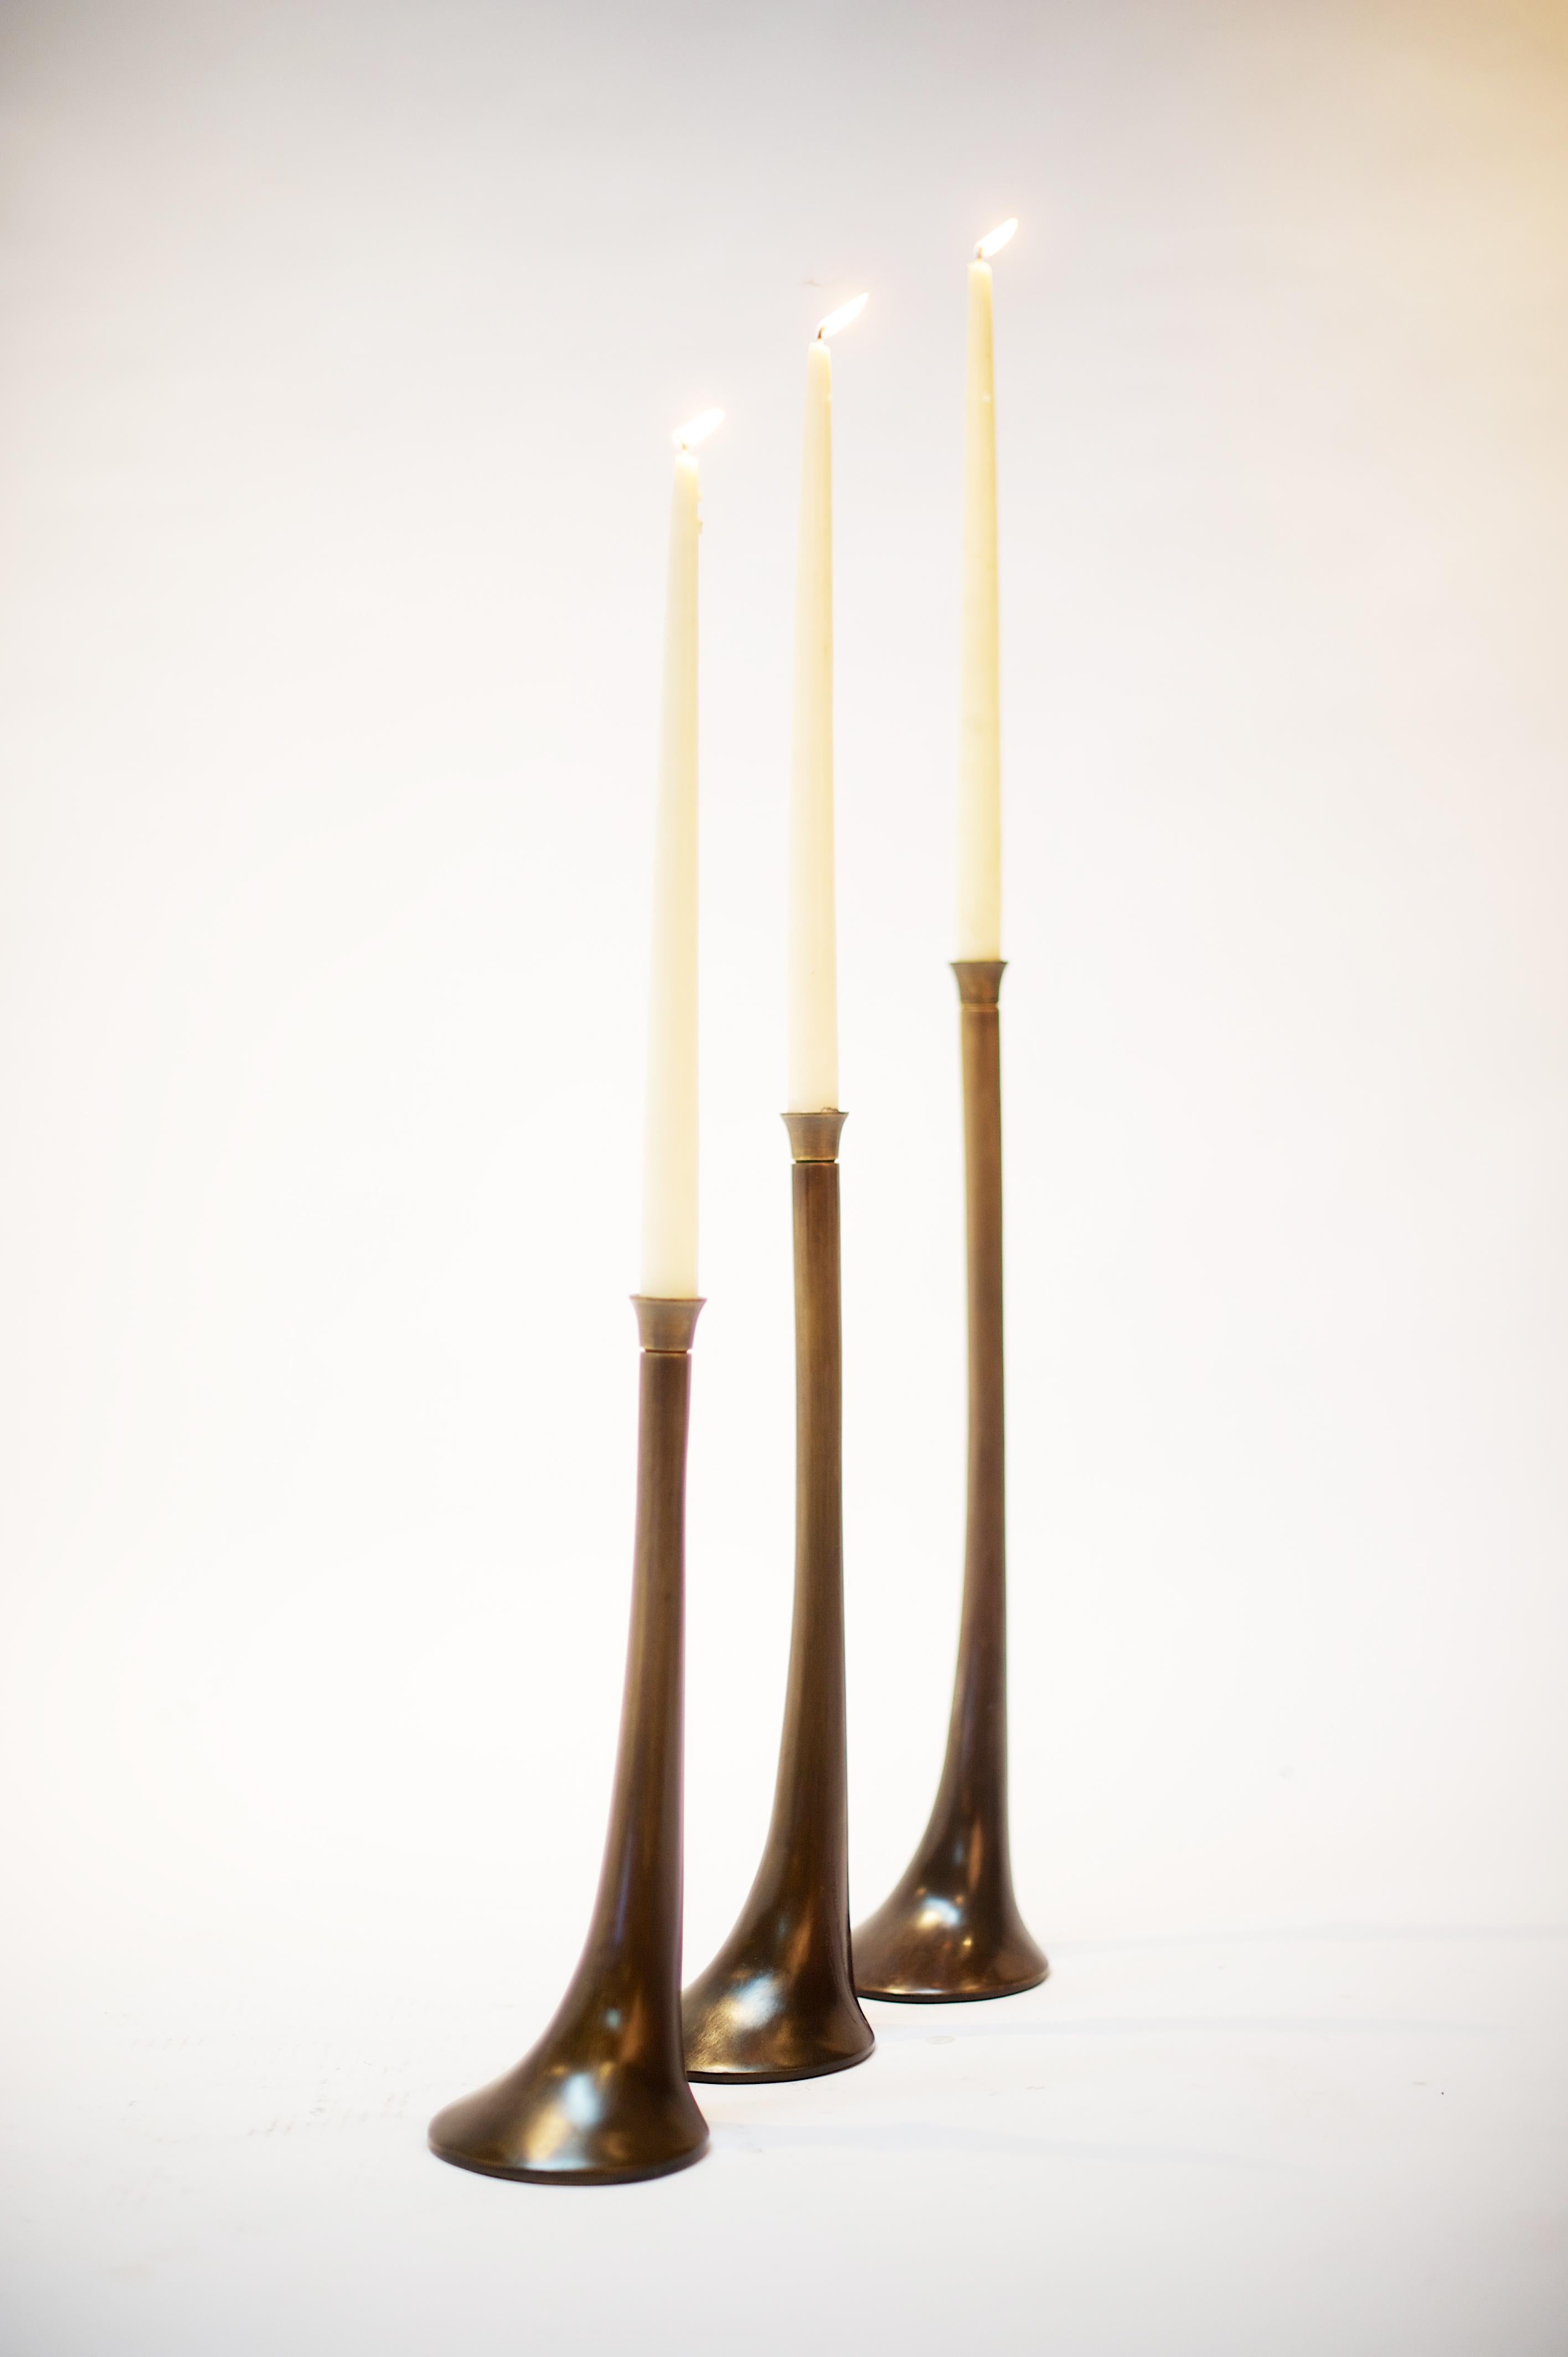 Small Elm Bronze Candlestick by Elan Atelier

The Elm Candleholders are cast using the lost wax method in an elegant sculptural shape. Shown in our antique bronze finish, with highlights (ombre). Comes in 3 sizes.

Dimensions/
Small/
dia 4.5 x h